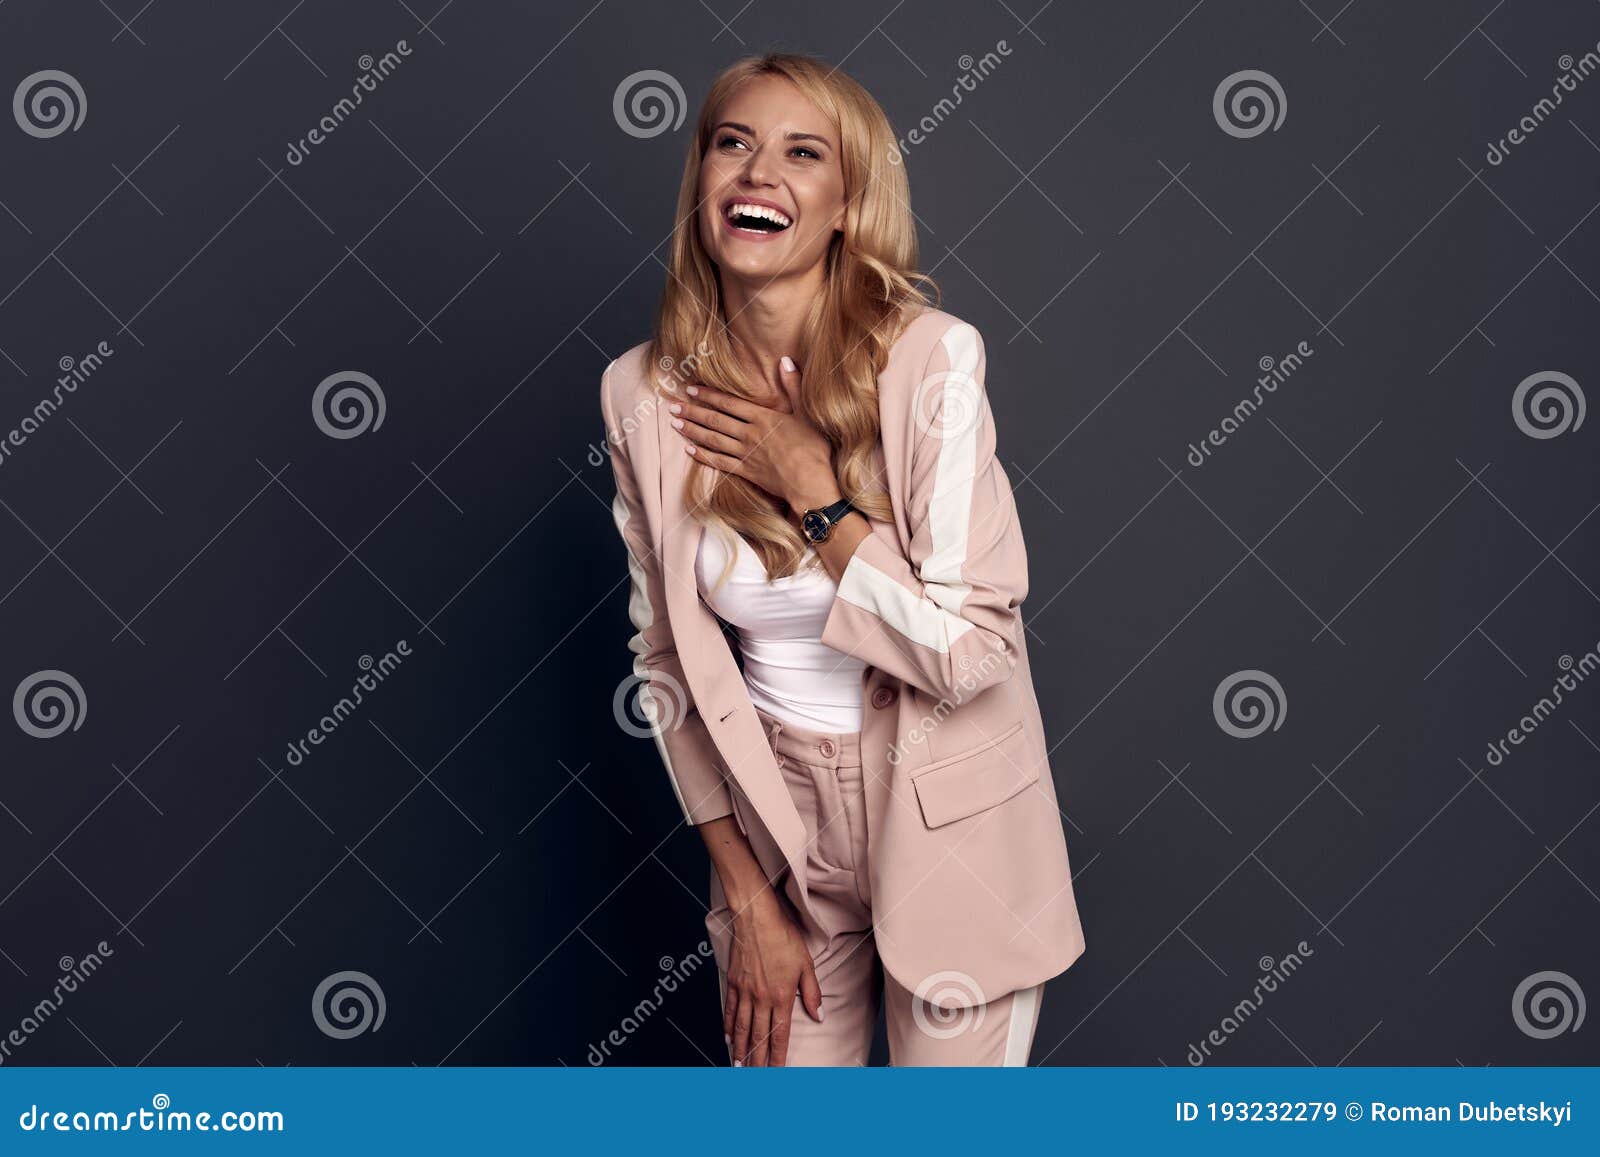 Happy And Carefree Emotive Blond Alluring Woman Having Fun Laughing Out Loud From Joy And